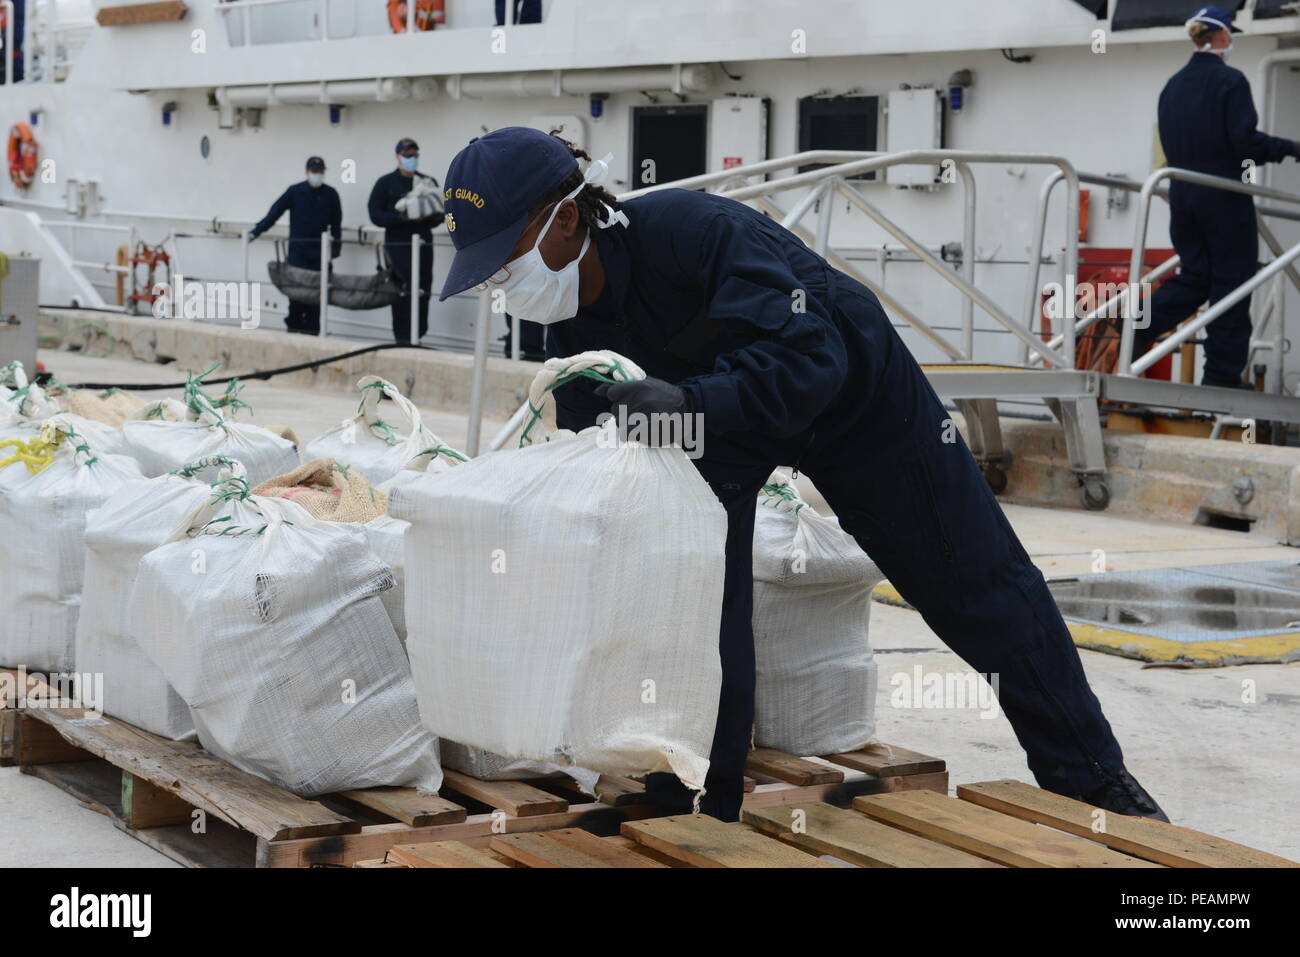 A Coast Guardsman offloads cocaine at Coast Guard Sector Miami Beach, Florida, Nov. 20, 2015. The HNLMS Friesland, an offshore patrol vessel from the Royal Netherlands Navy, interdicted a go-fast vessel with four suspected smugglers and 22 bales of cocaine with an estimated wholesale value of $17 million. U.S. Coast Guard photo by Petty Officer 2nd Class Mark Barney. Stock Photo